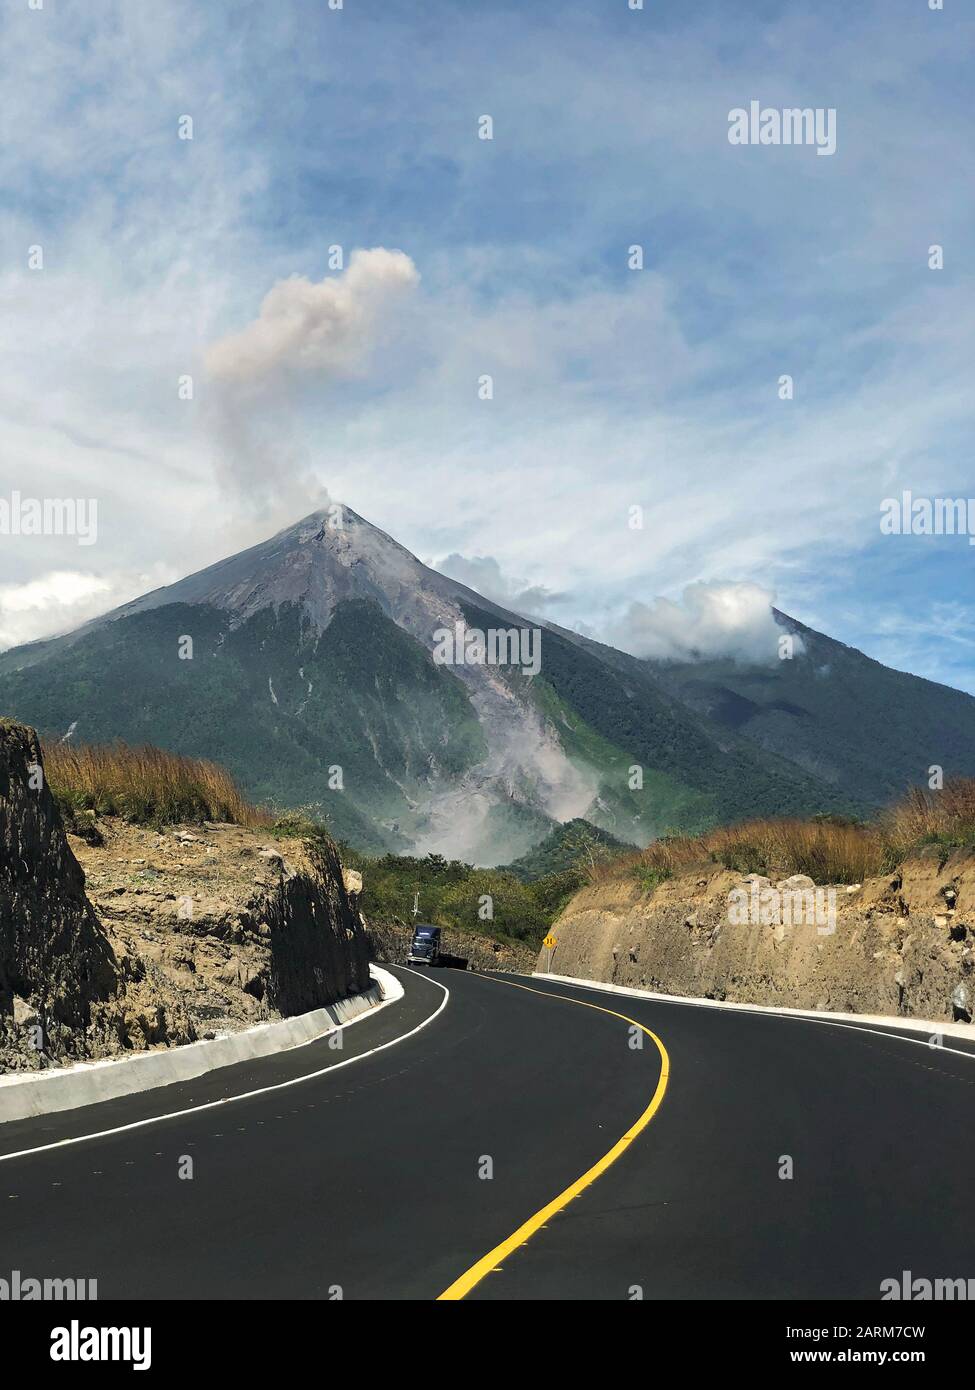 Guatemala's Fuego and Acatenango Volcanoes seen from a highway Stock Photo